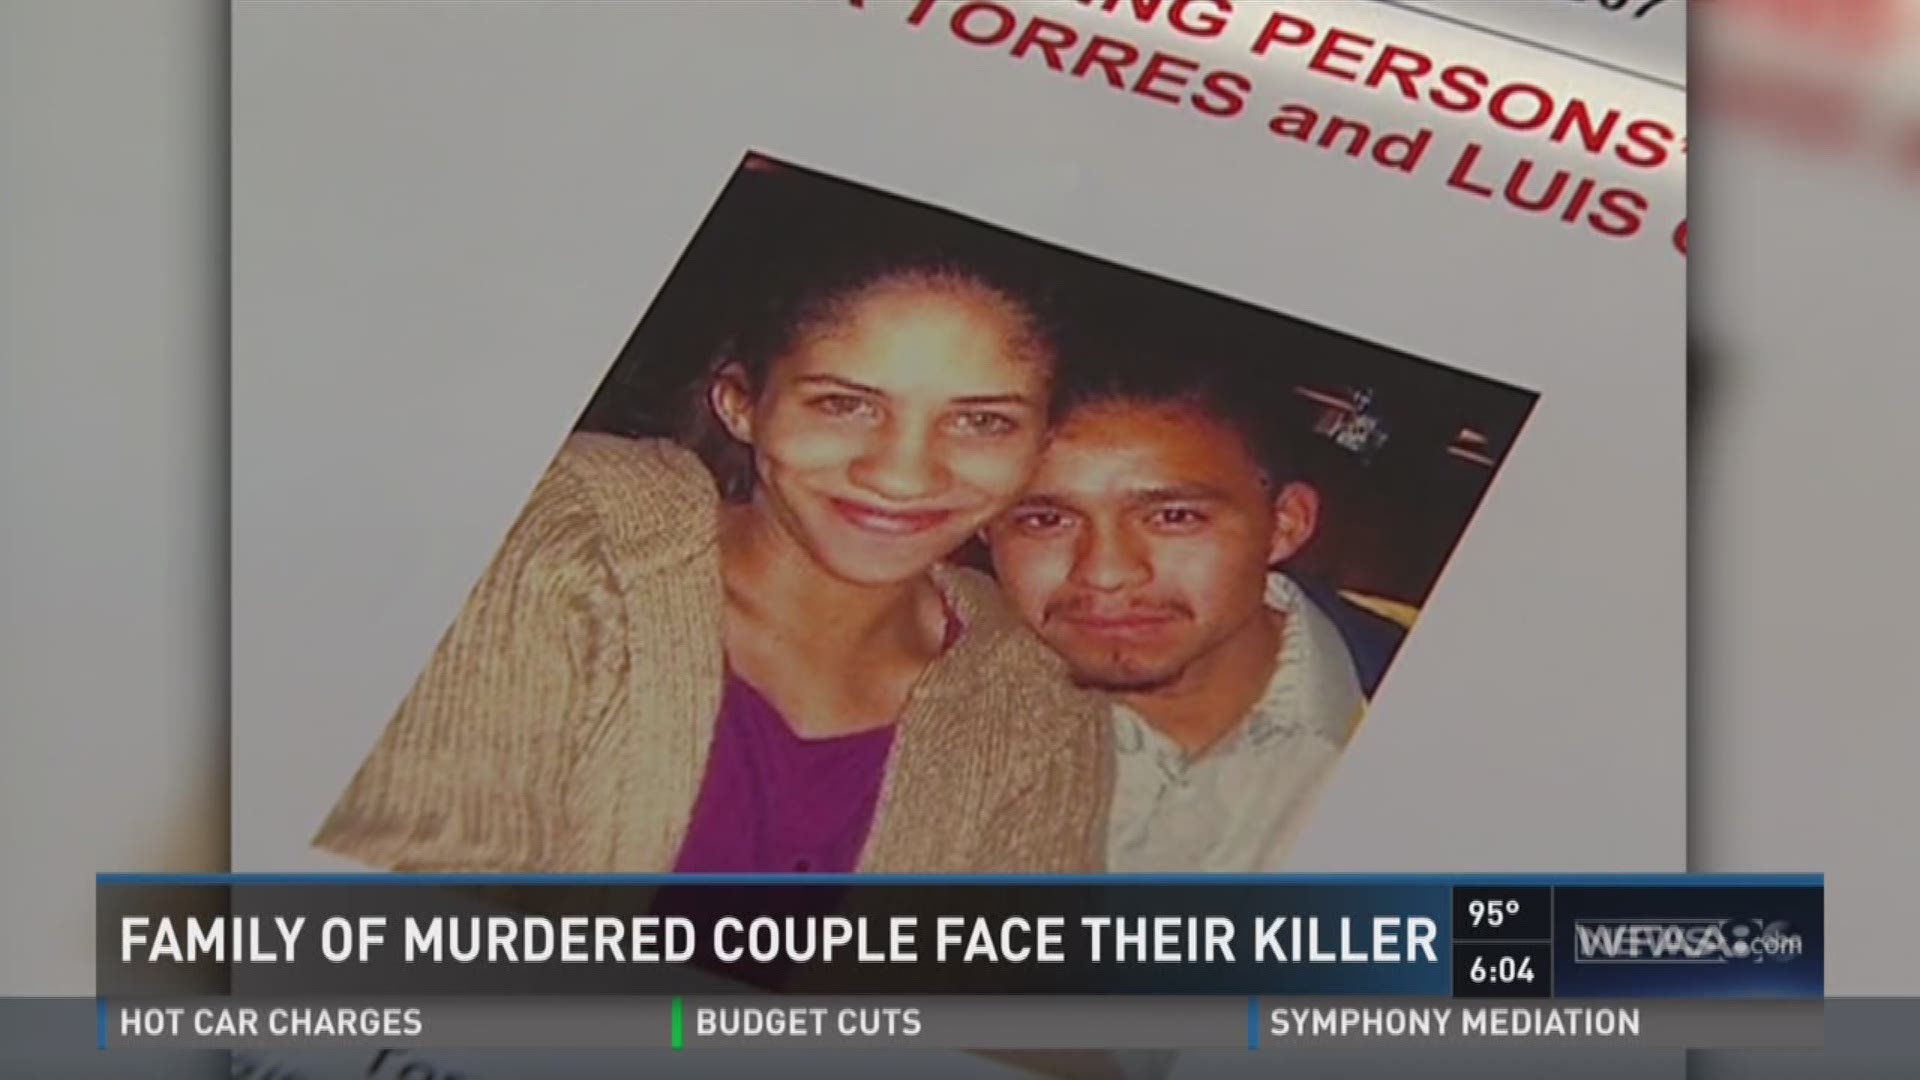 Families of murdered couple face their killer